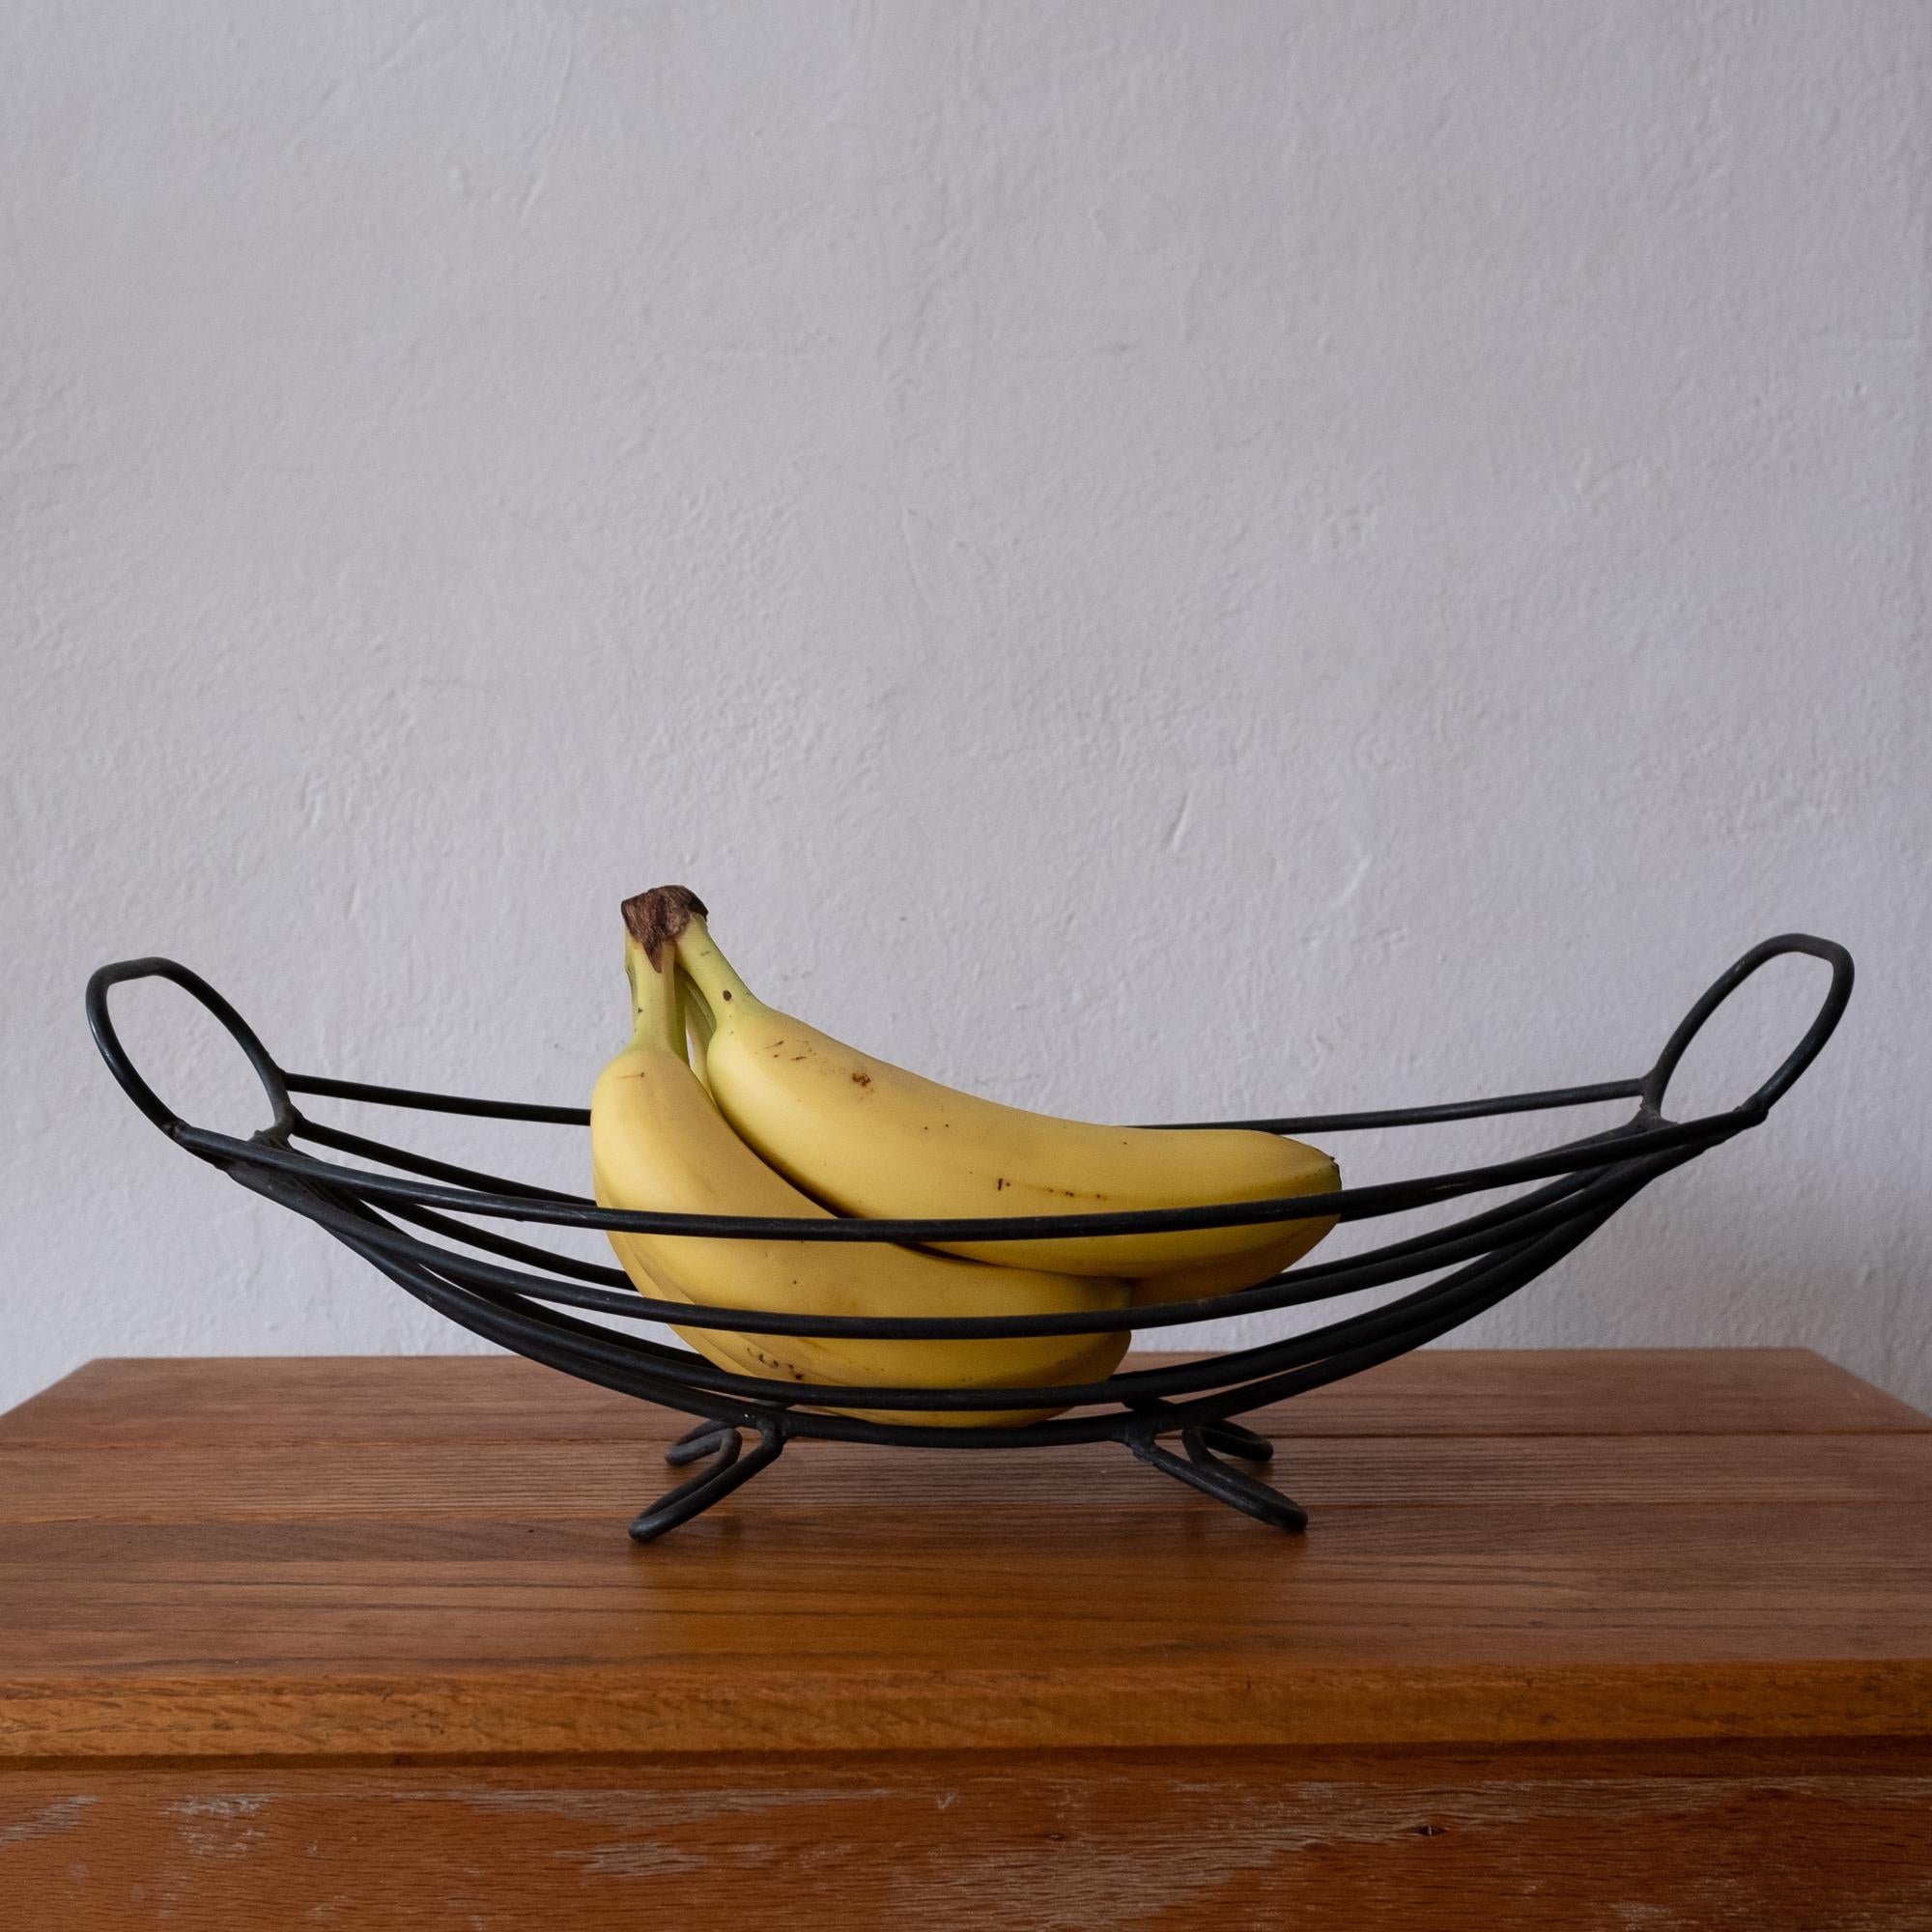 1950s Modernist  Atomic Fruit Bowl in the style of Ferris Shacknove  For Sale 5